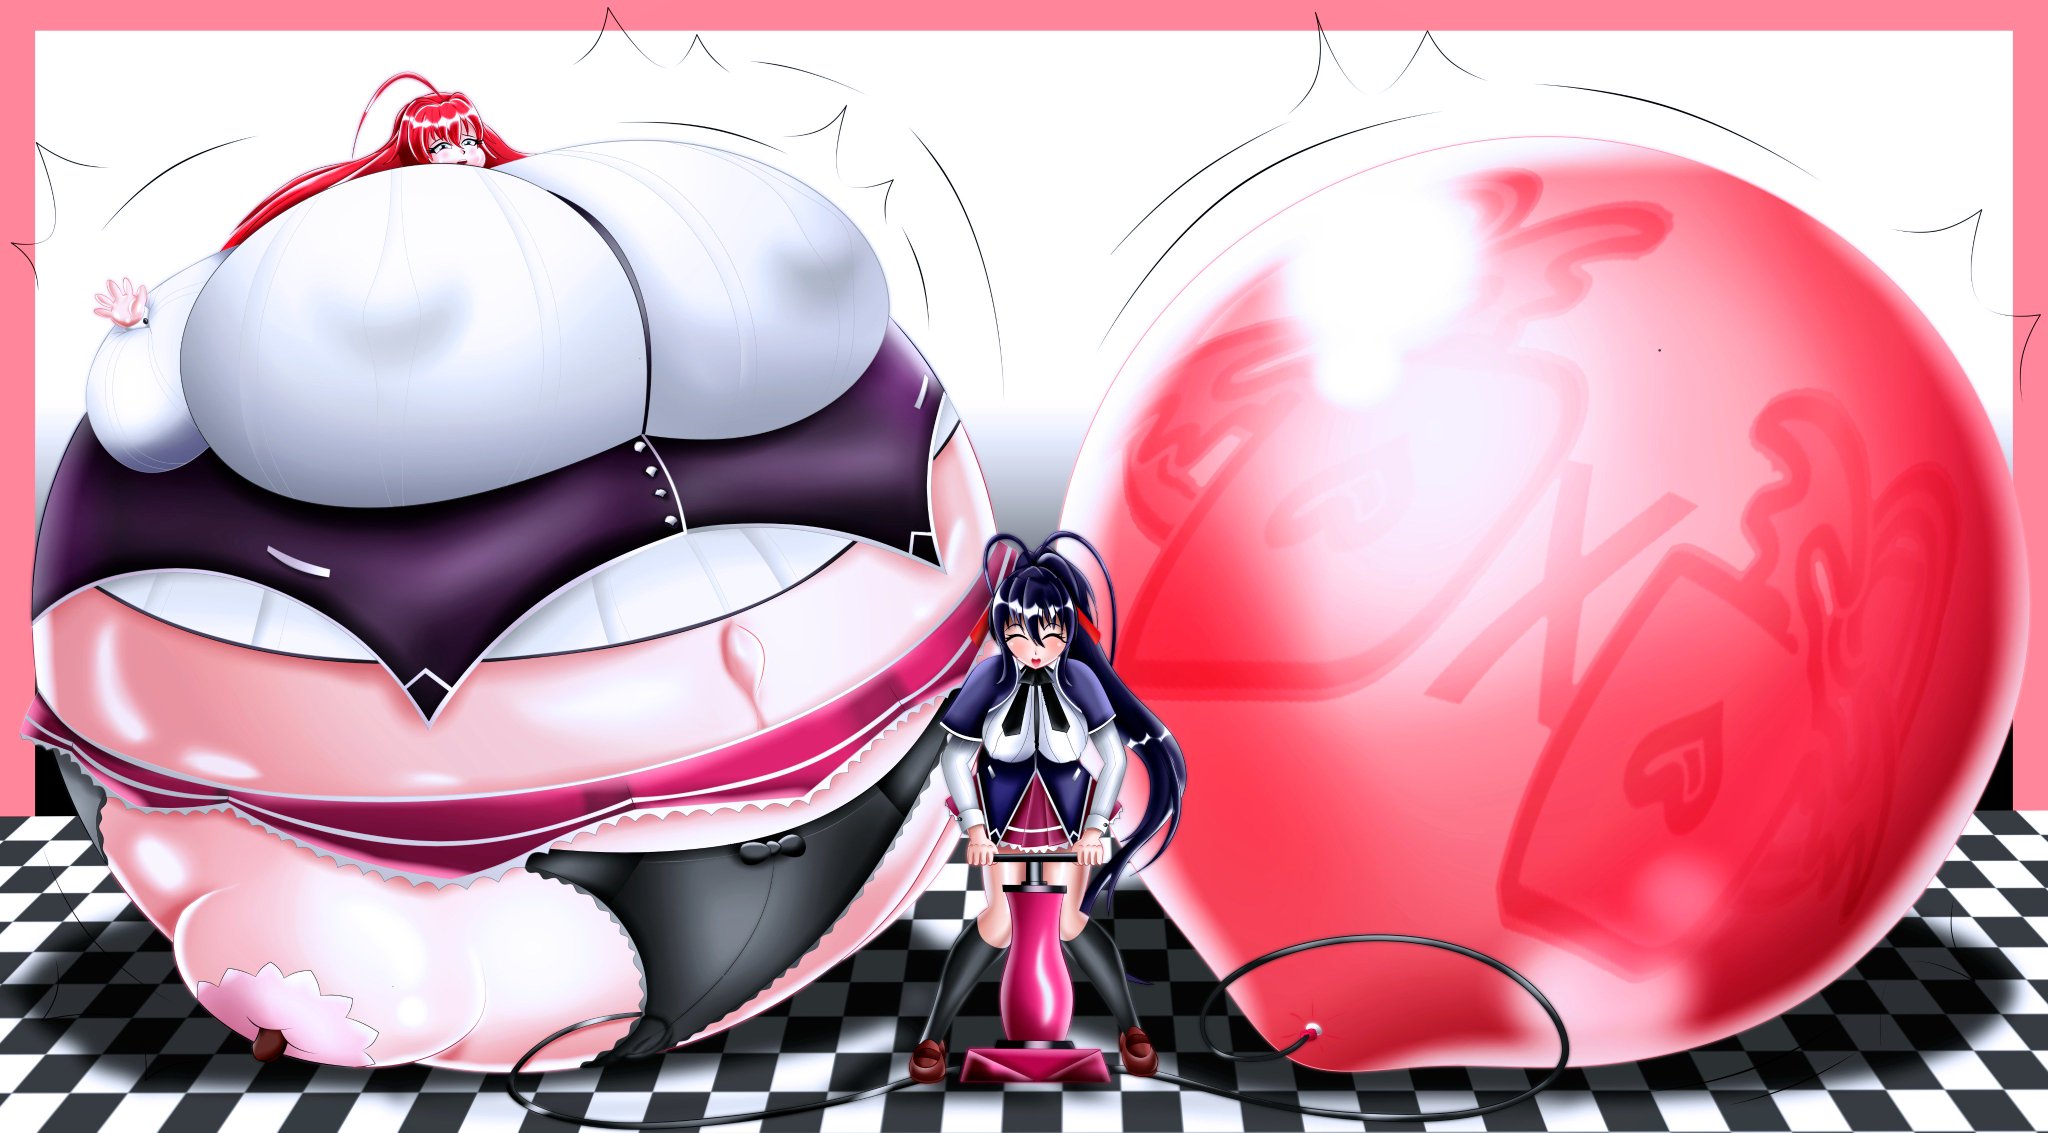 “Rias Gremory inflation, pumped on like a balloon. 